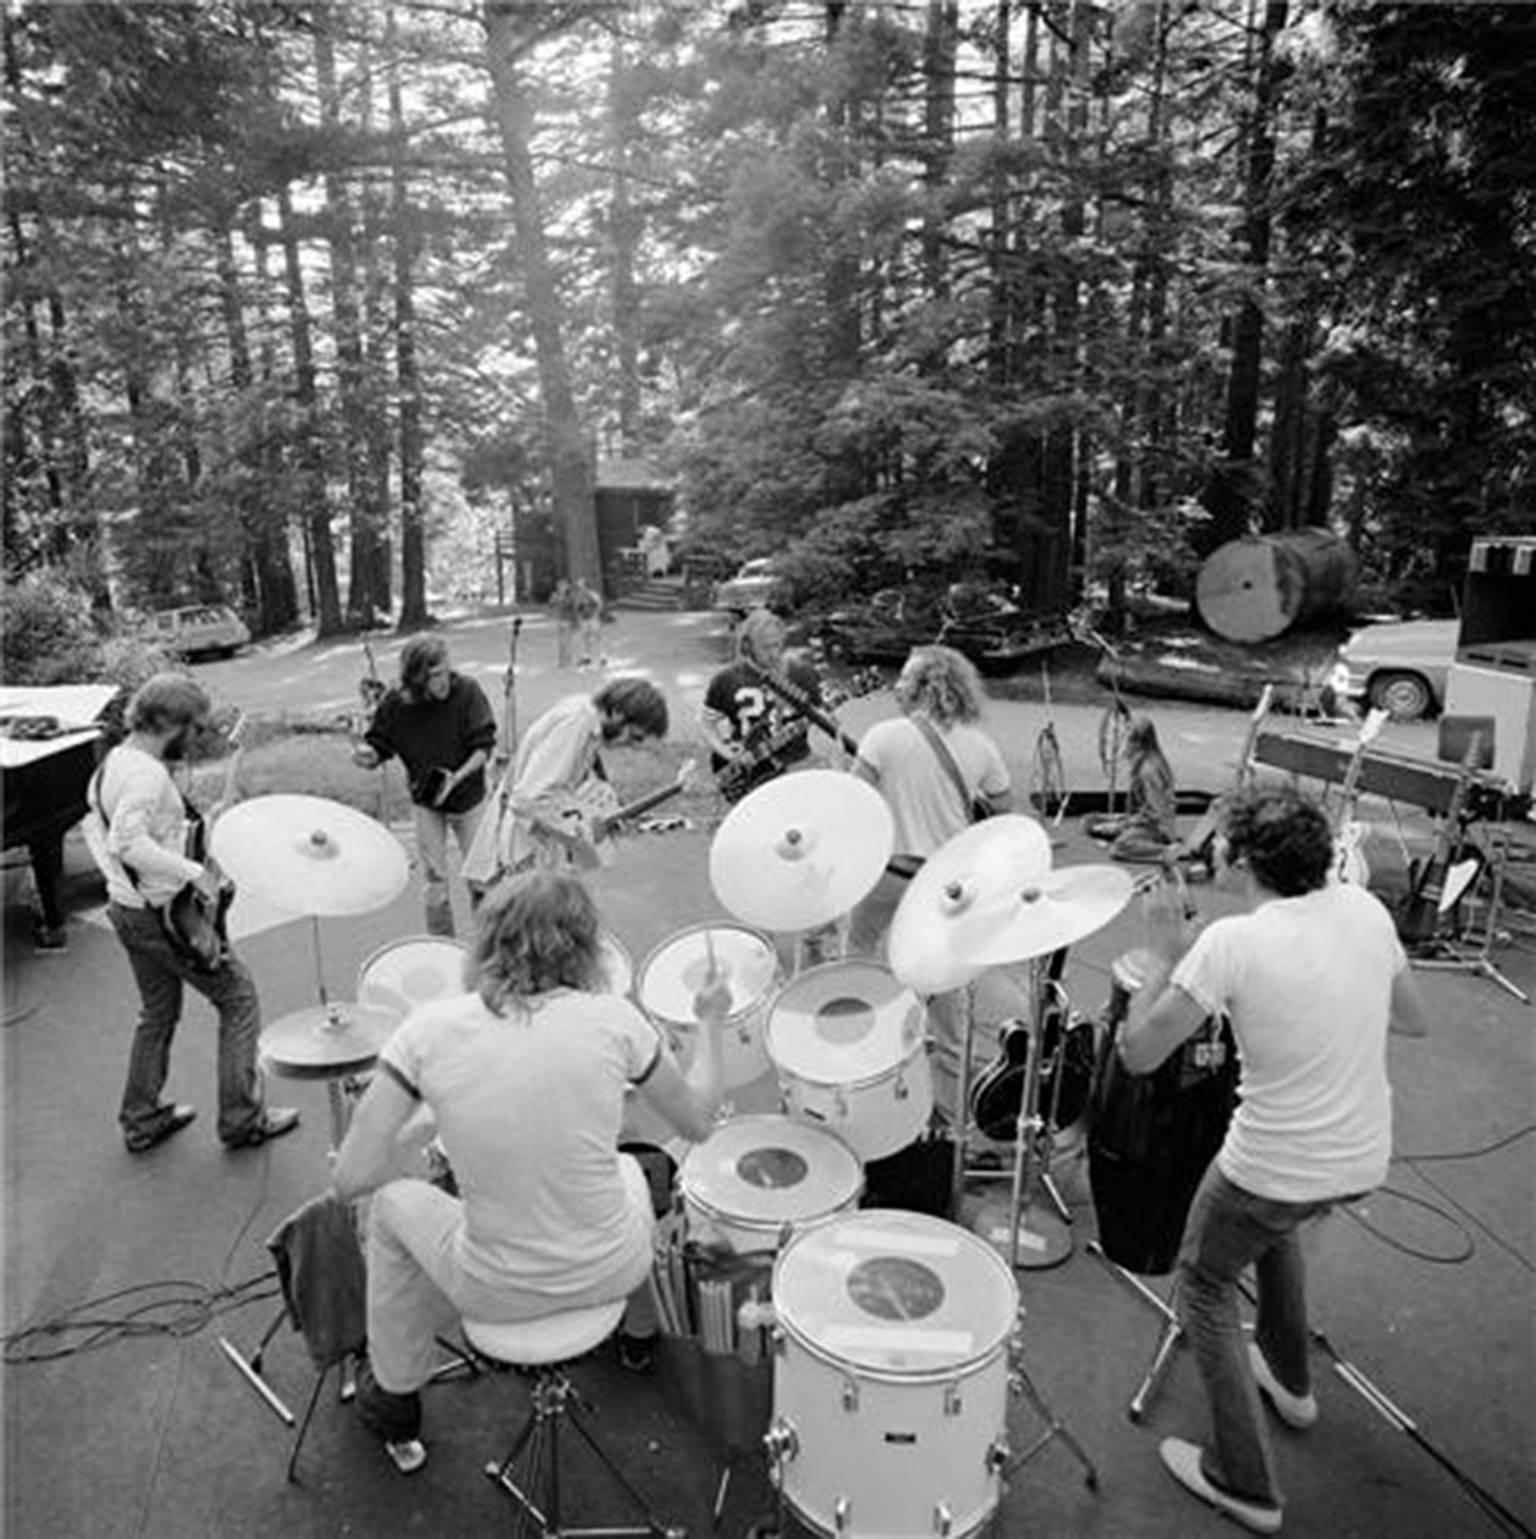 Joel Bernstein Black and White Photograph - Crosby, Stills, Nash and Young, Woodside, CA 1974